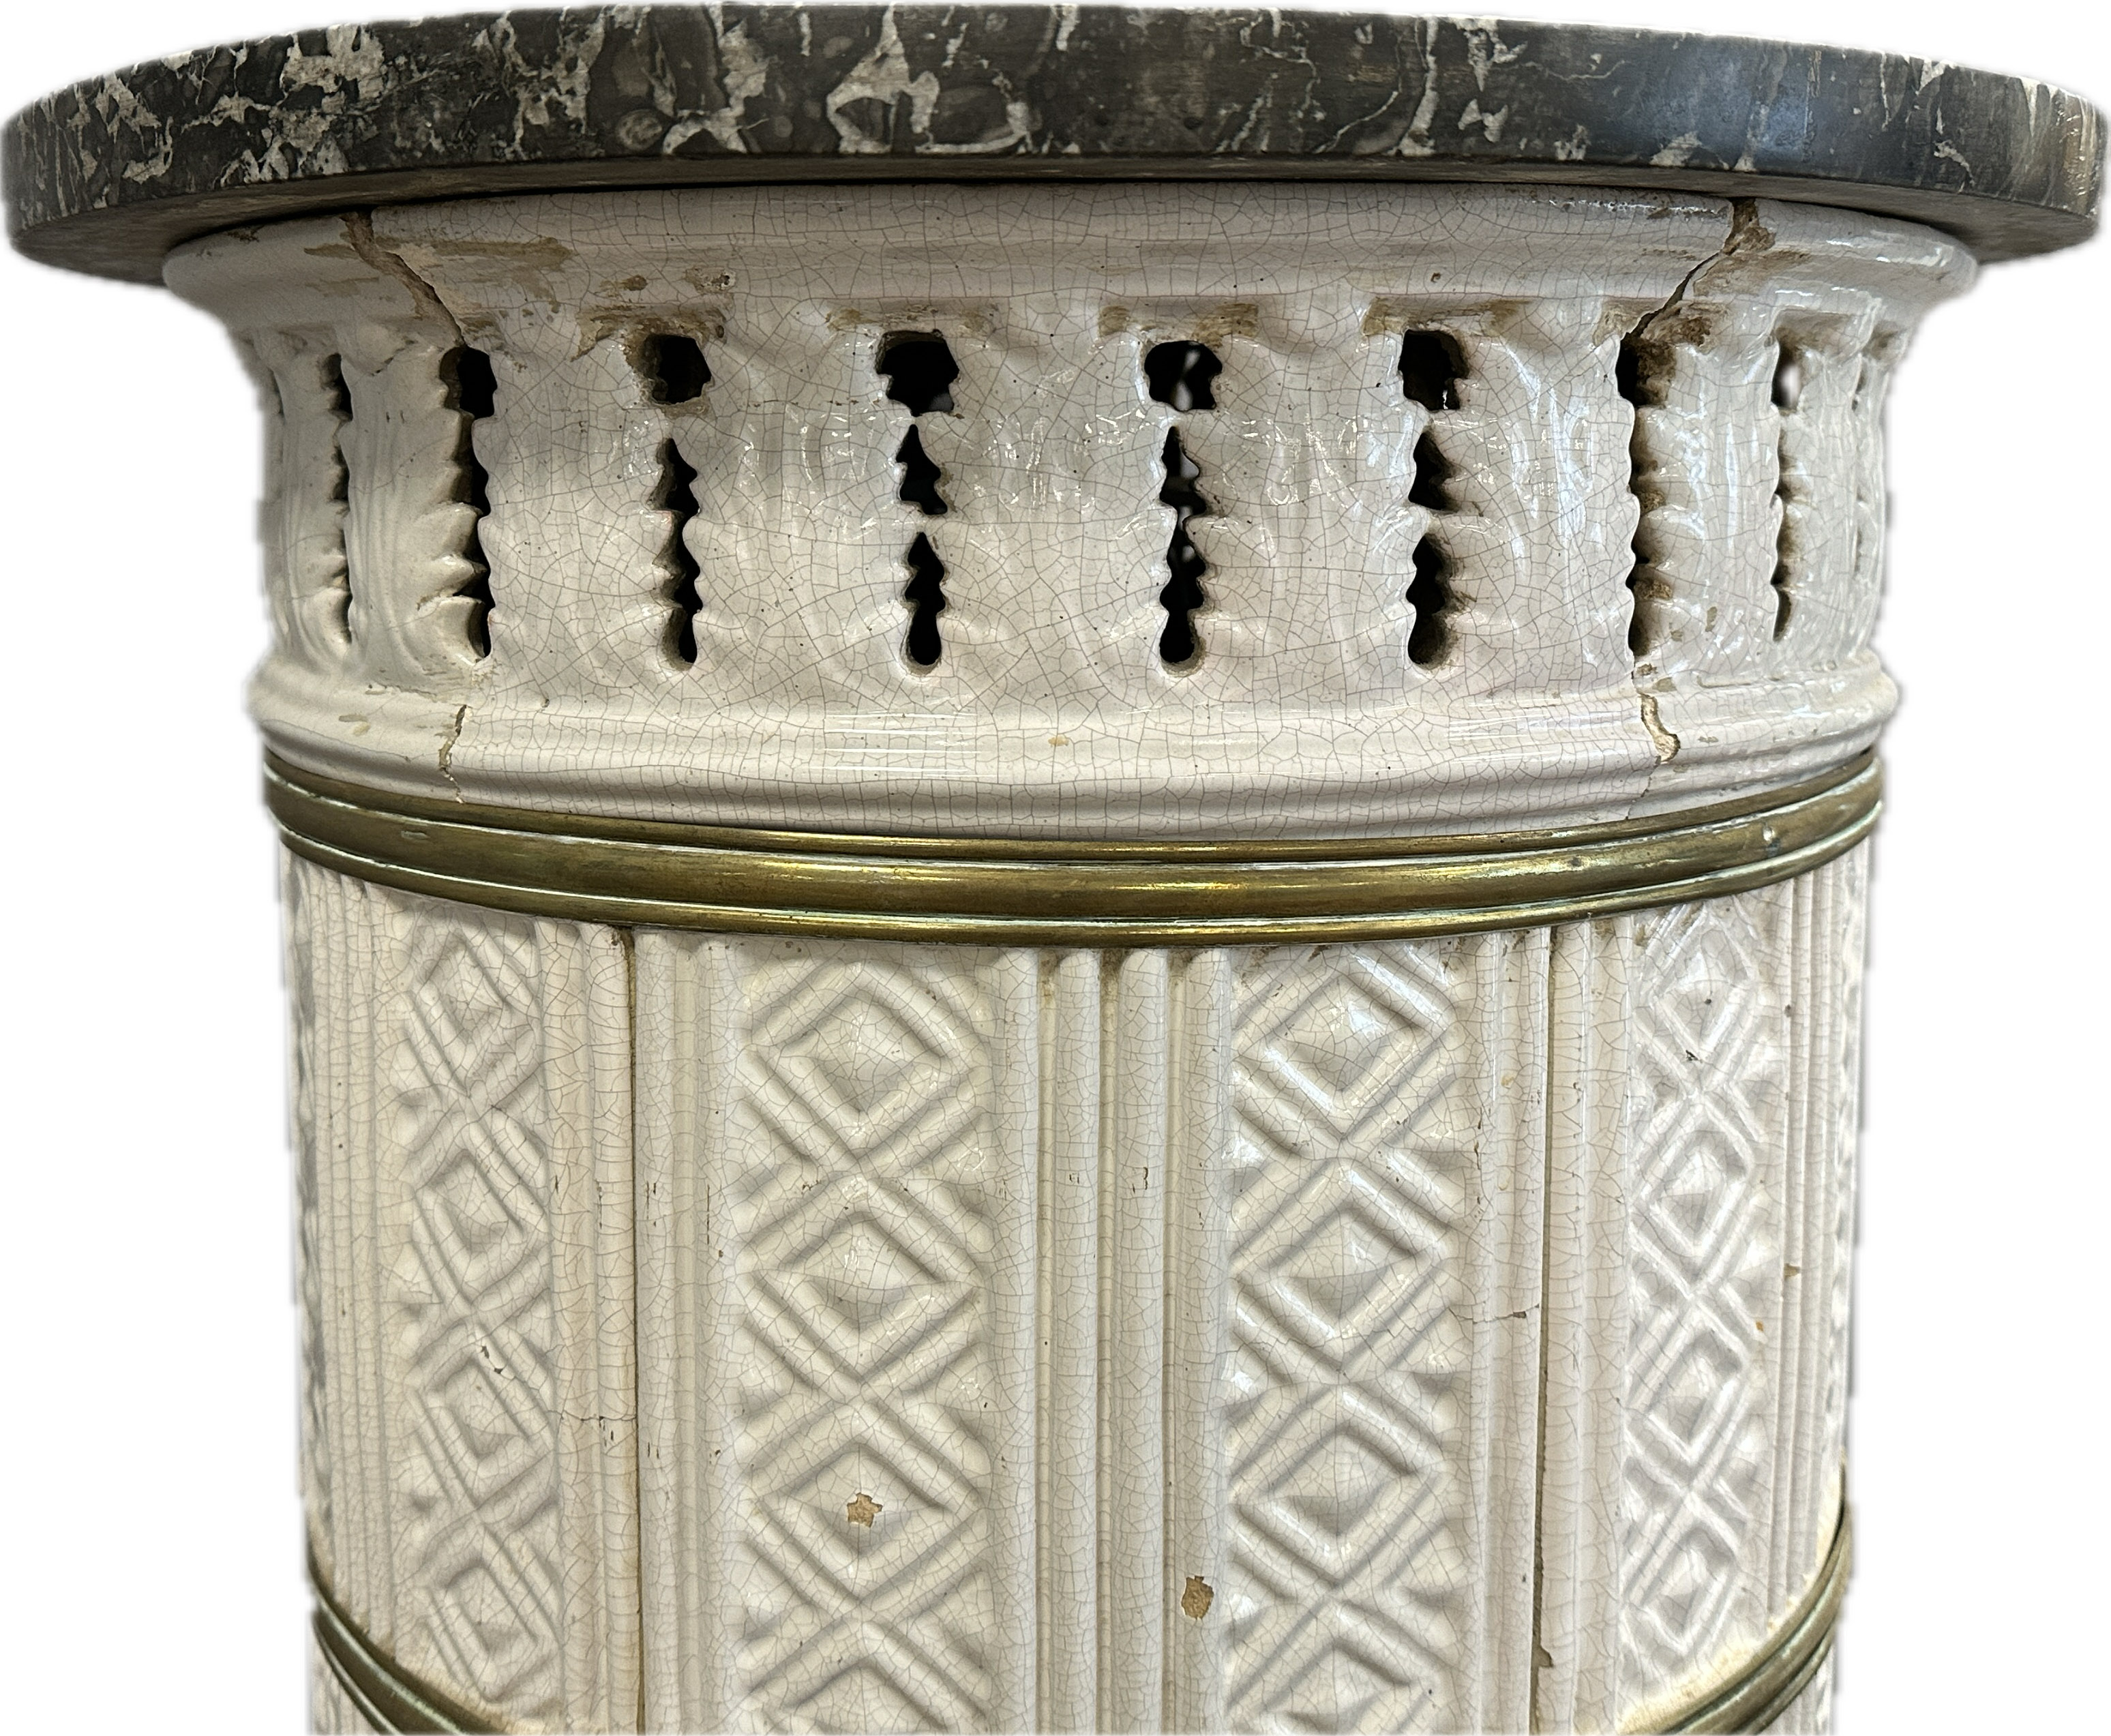 White Biedermeier round stove with tiles in relief structure. - Image 6 of 19